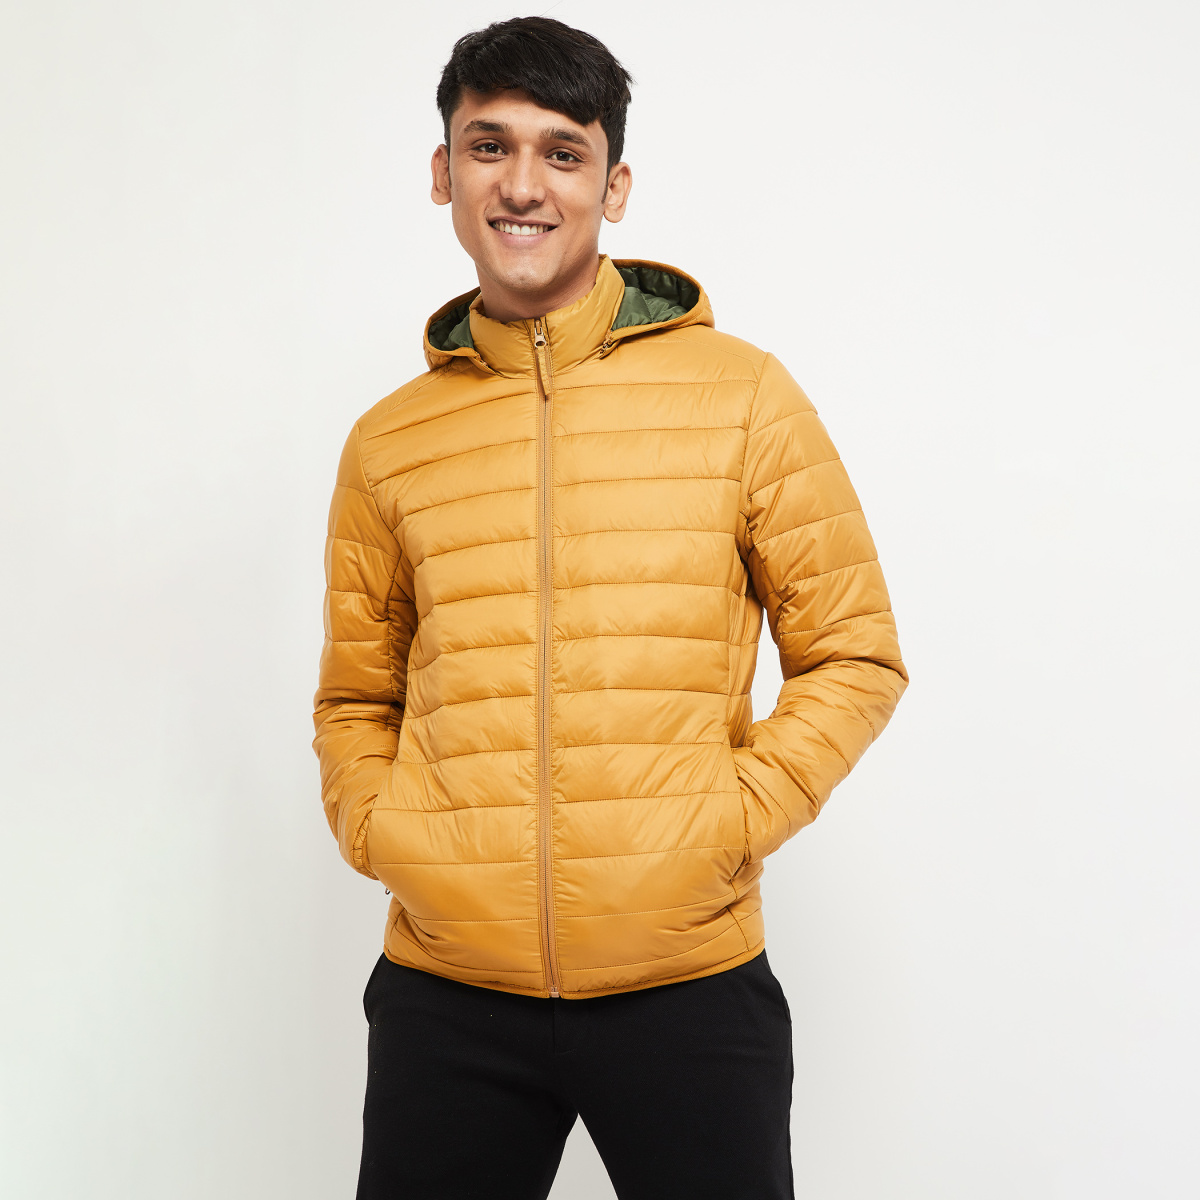 UNIQLO ULTRALIGHT DOWN Jacket Review | DON'T Make My MISTAKES! - YouTube